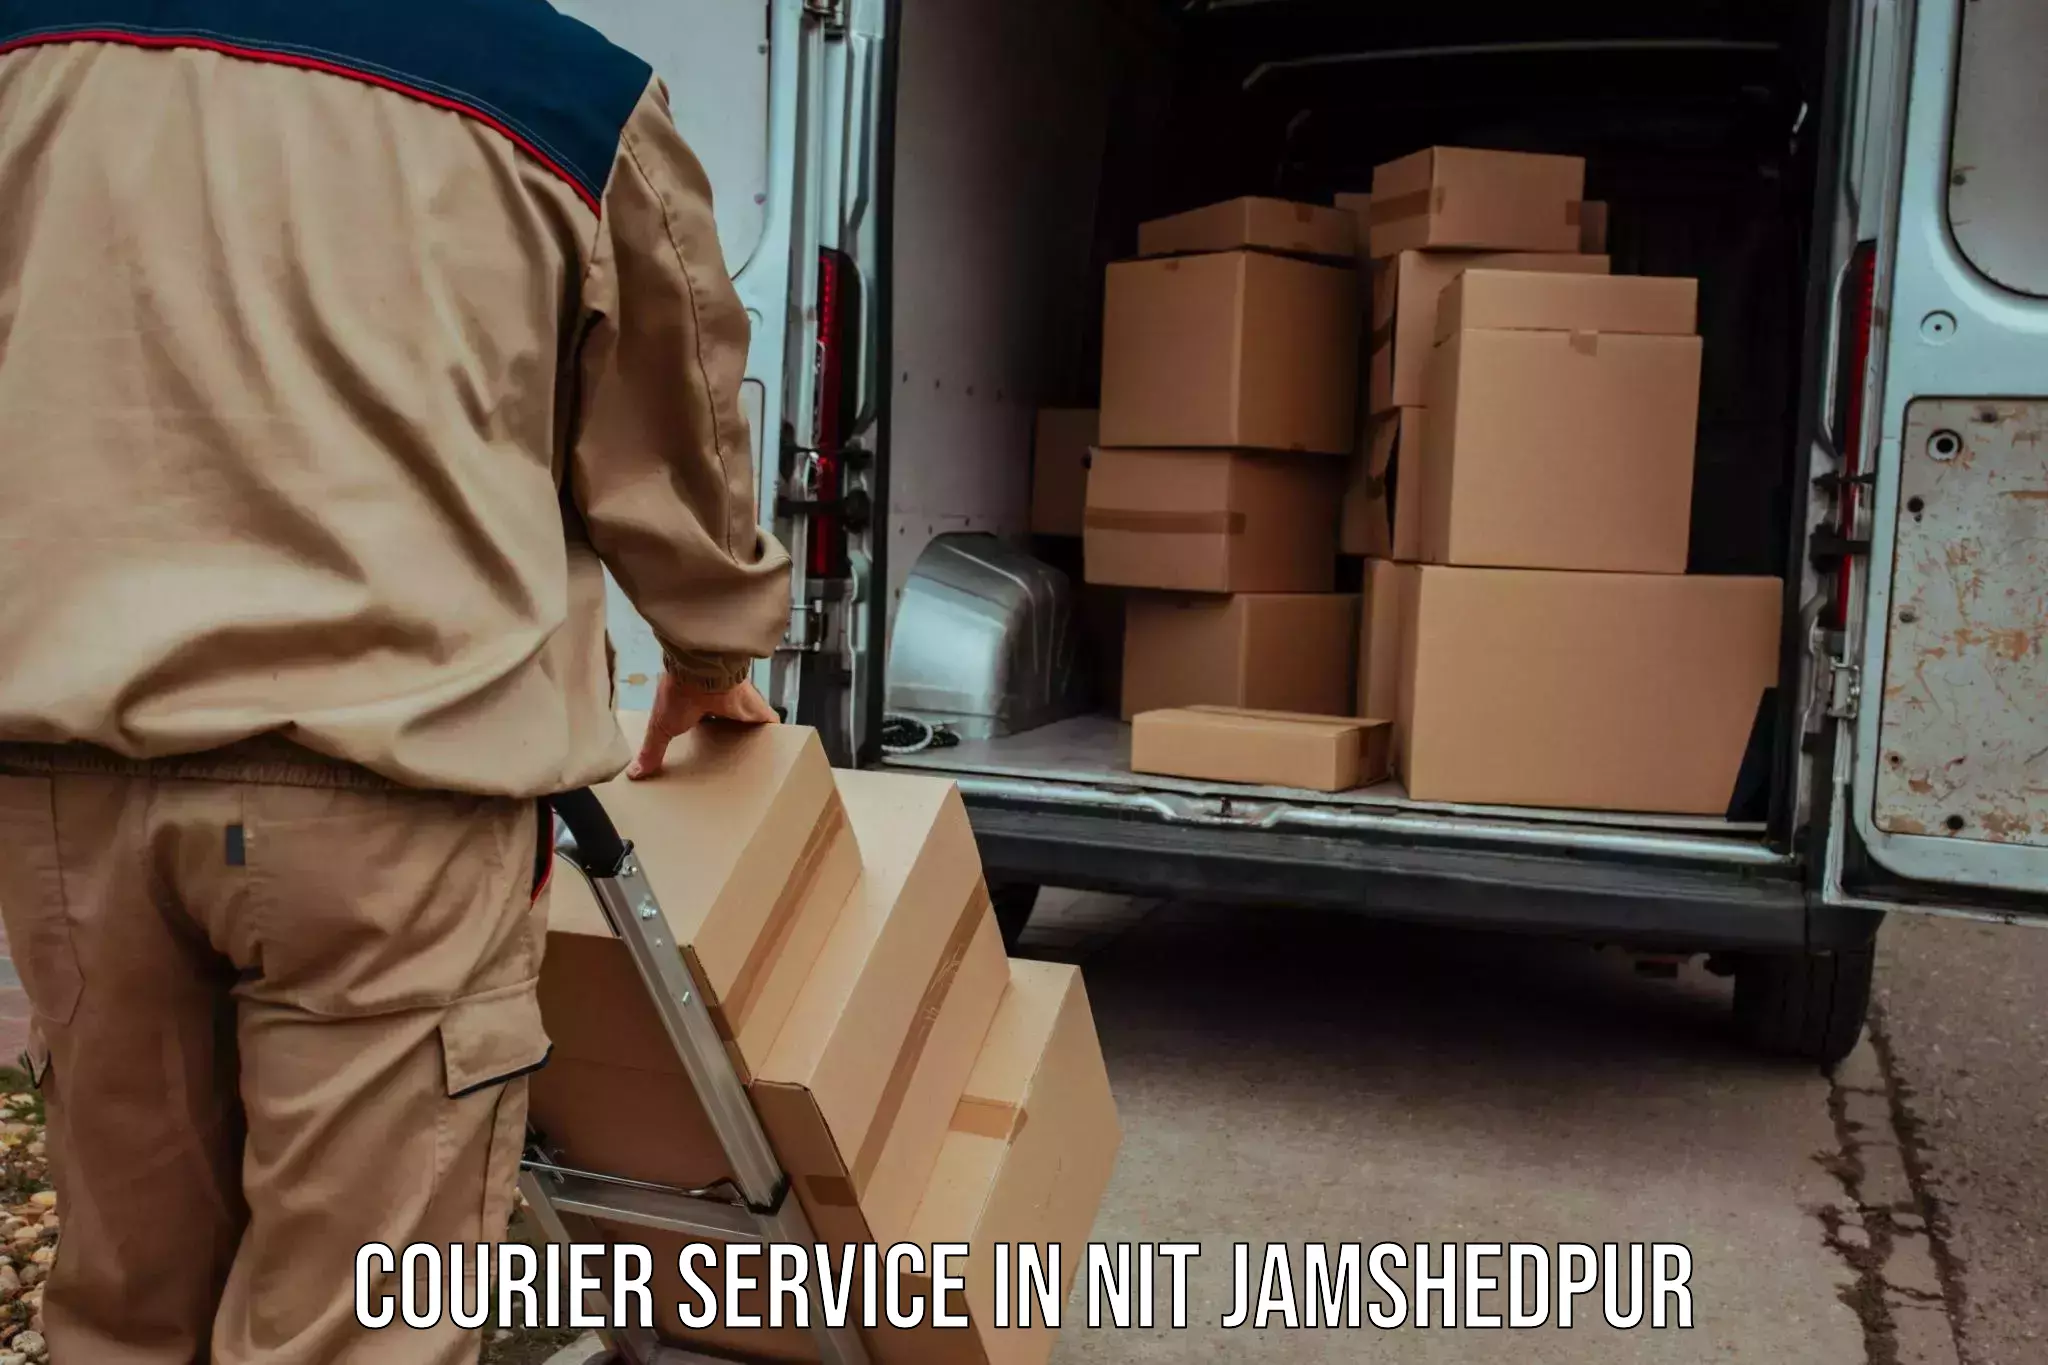 Tailored shipping plans in NIT Jamshedpur